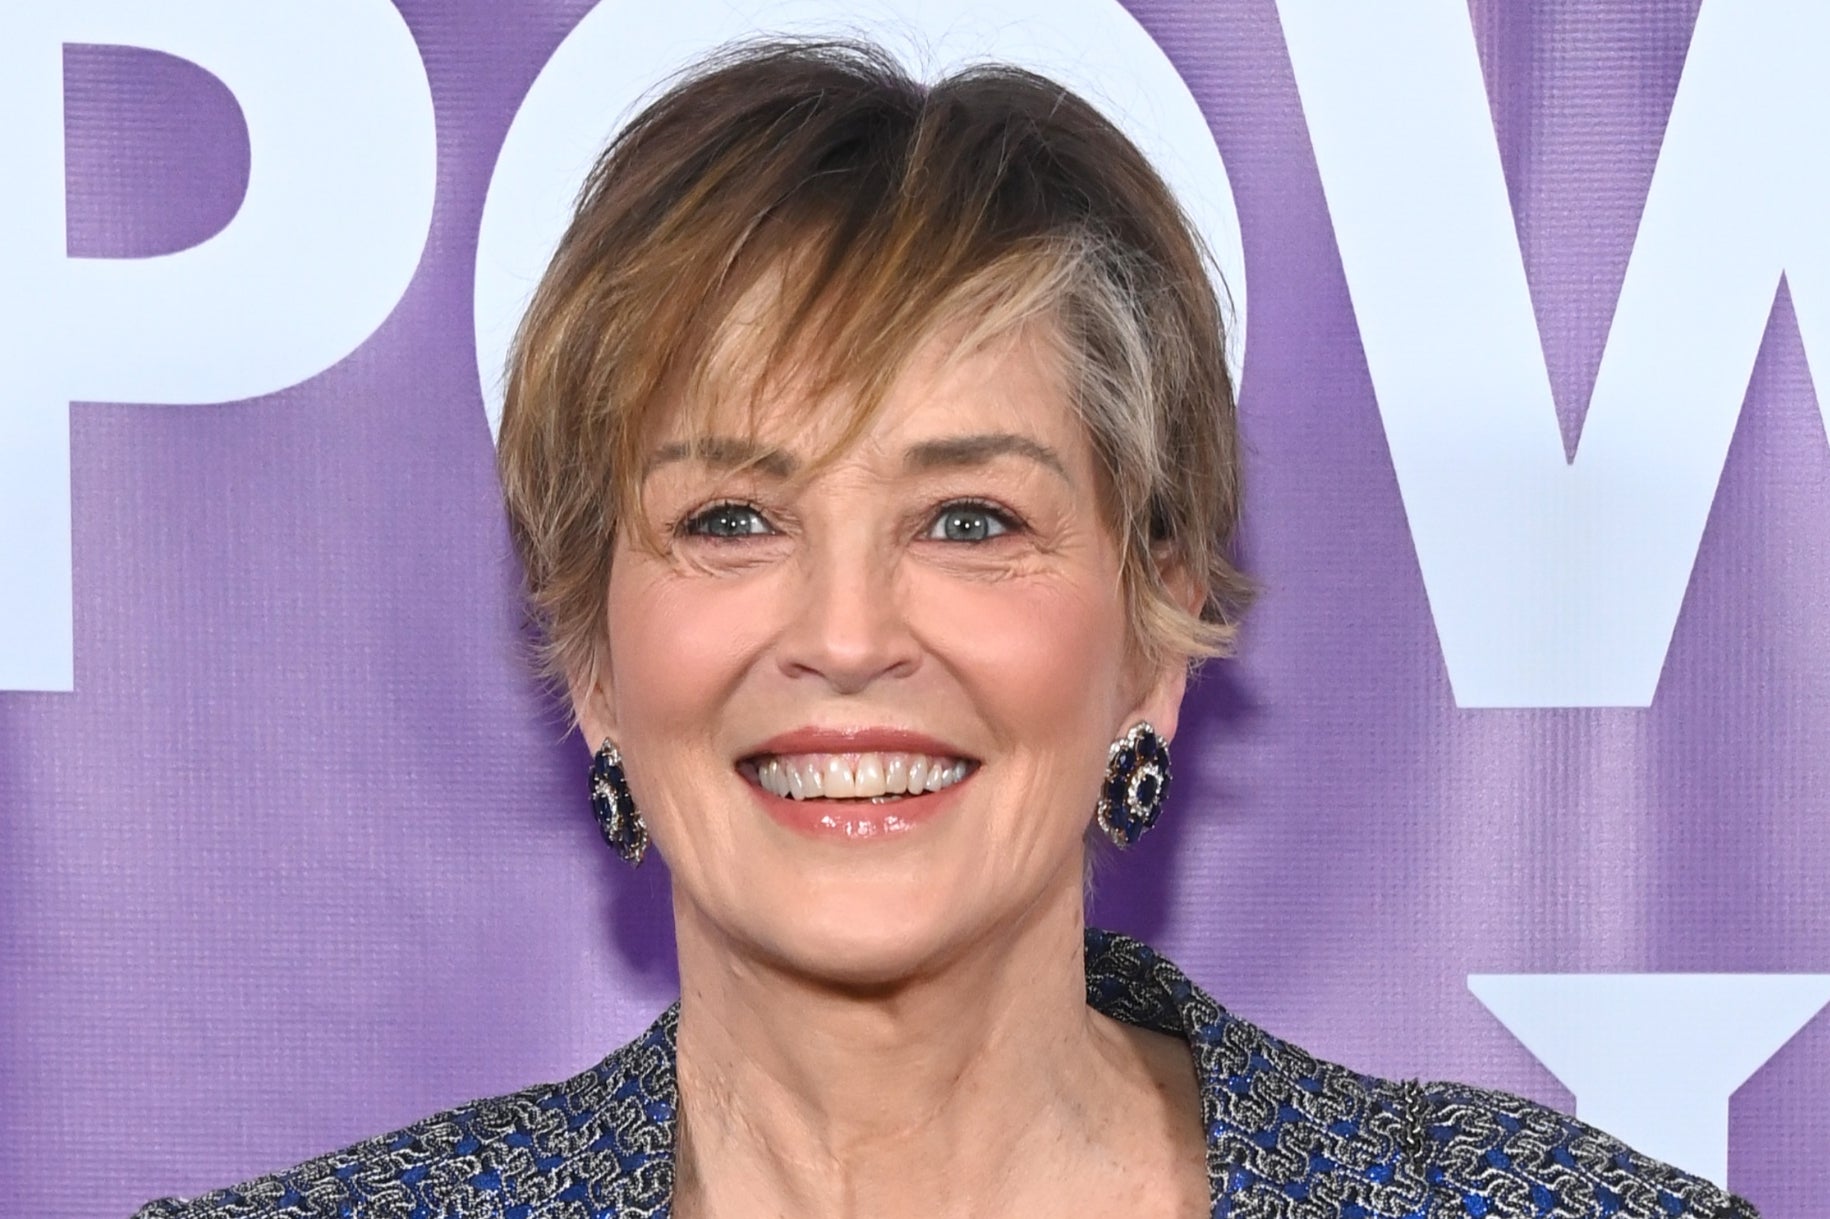 Sharon Stone claimed she was kicked out of a meeting after sharing her idea for a Barbie movie